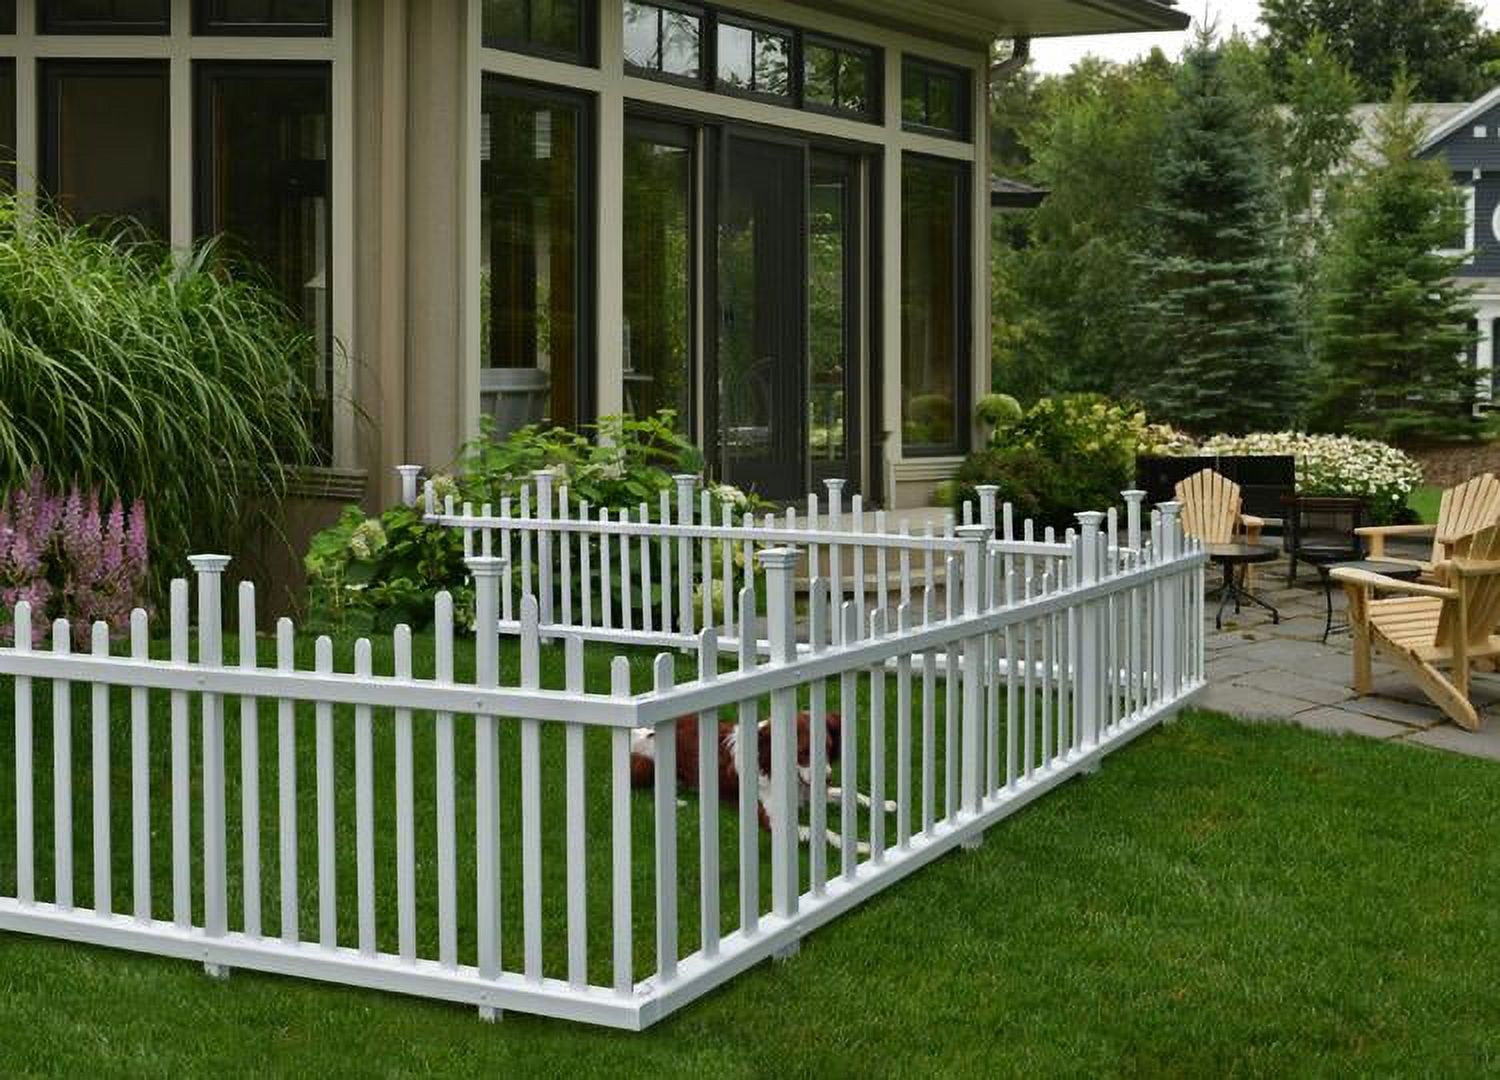 Zippity Outdoor Products Madison No-Dig Vinyl Fence Kit (30in x 56in) (2 Pack) - image 1 of 8